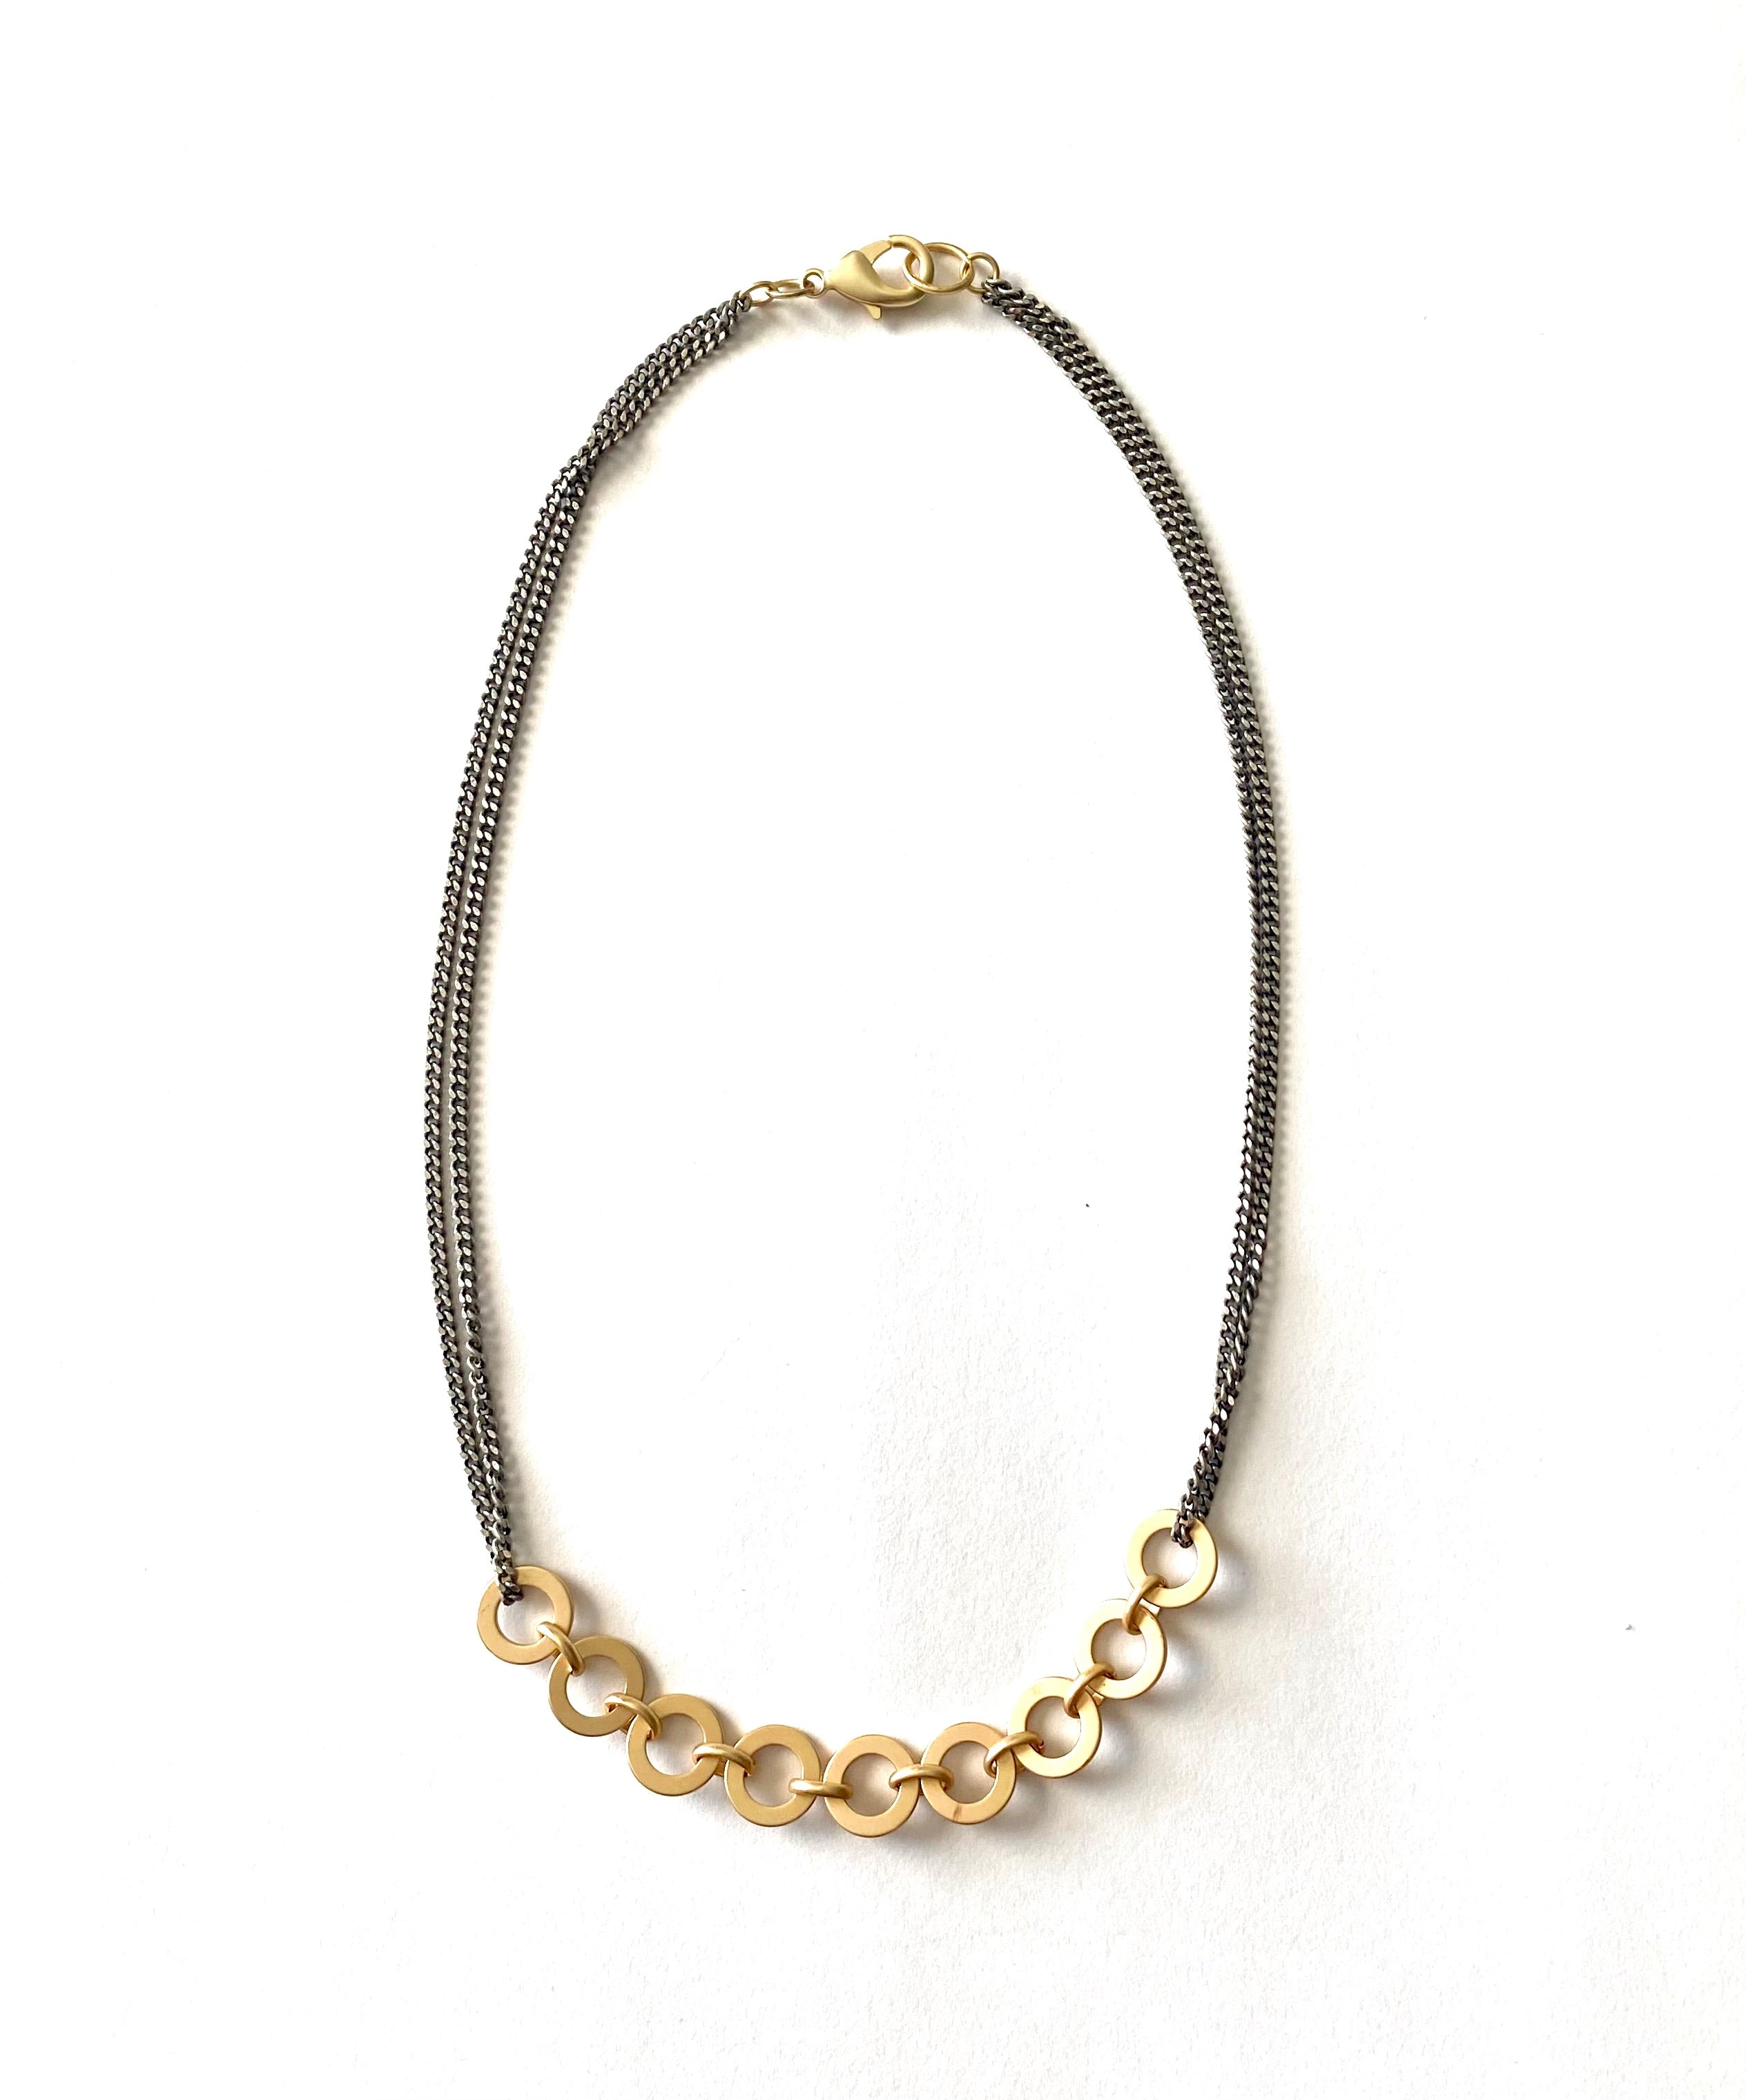 Jango- Mixed metal necklace with curb and circular chain